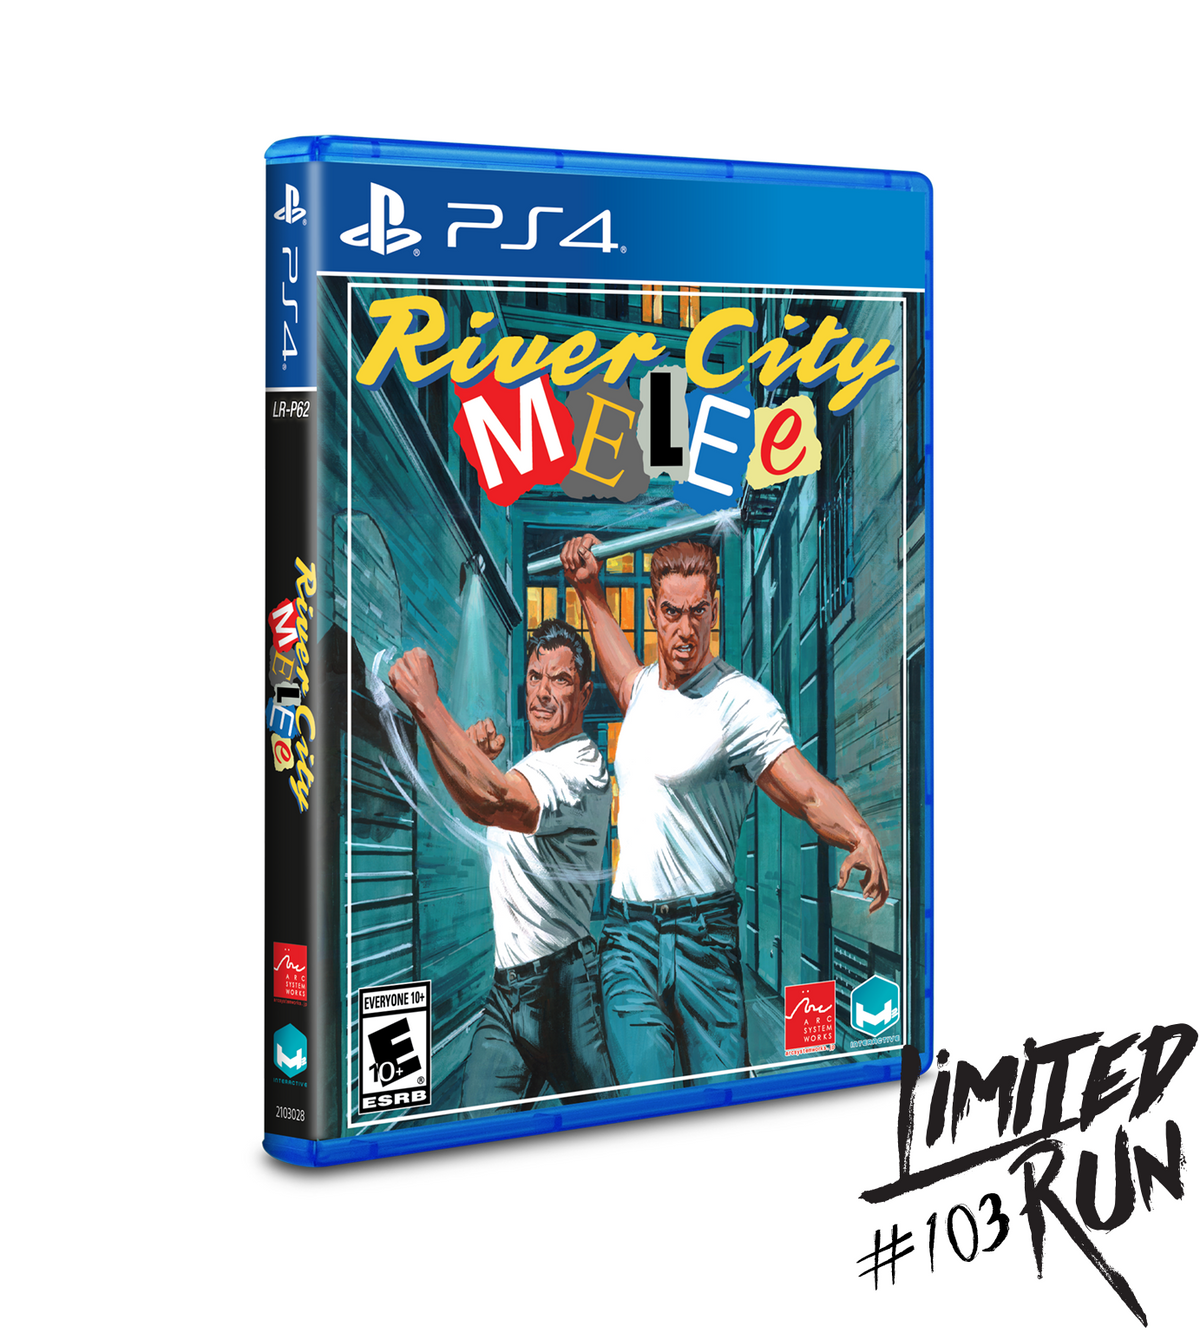 Limited Run #103: River City Melee (PS4)